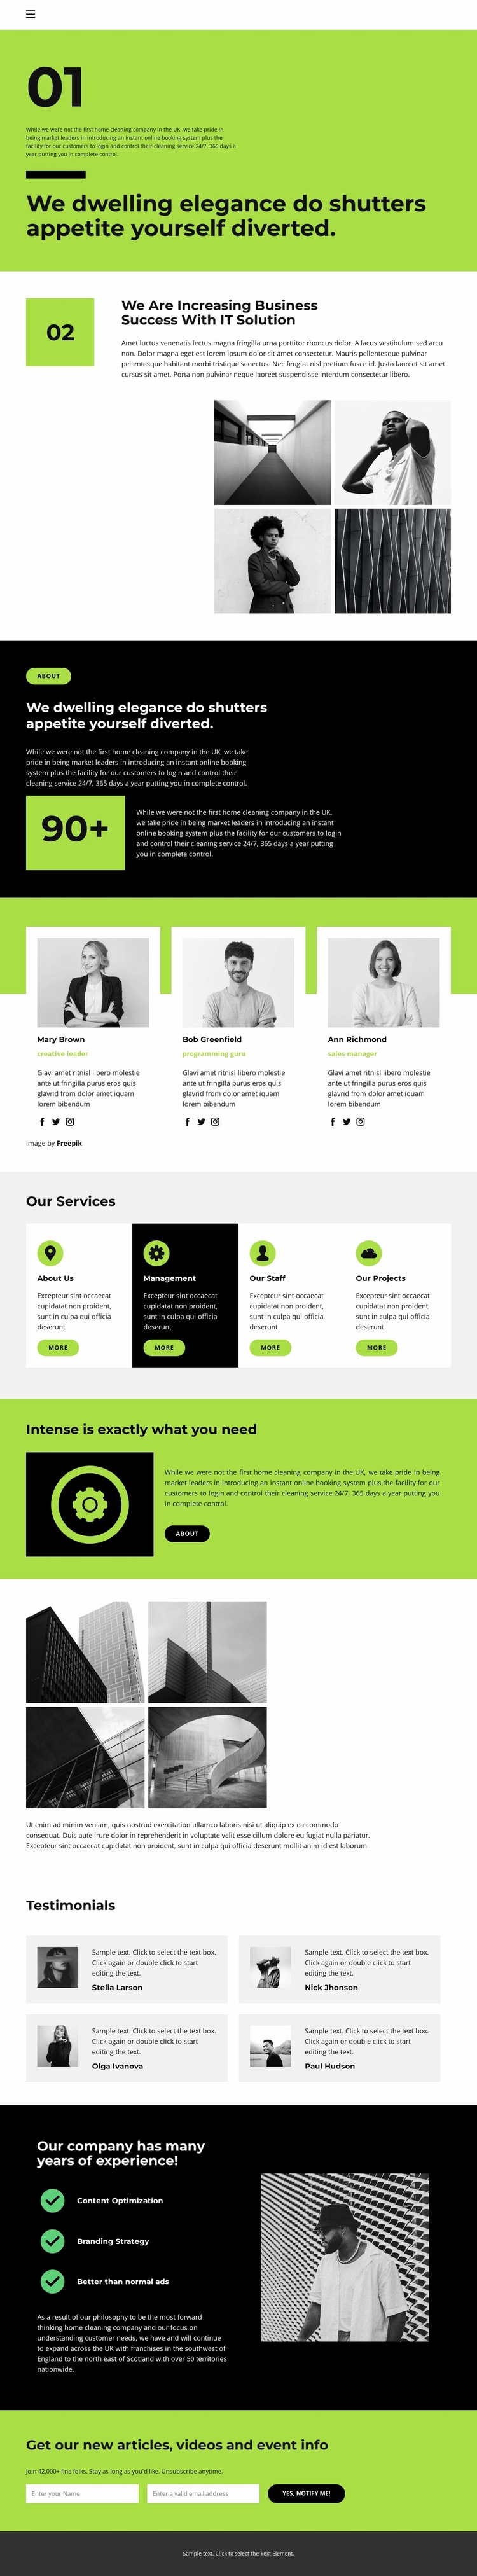 Save your finances Website Template